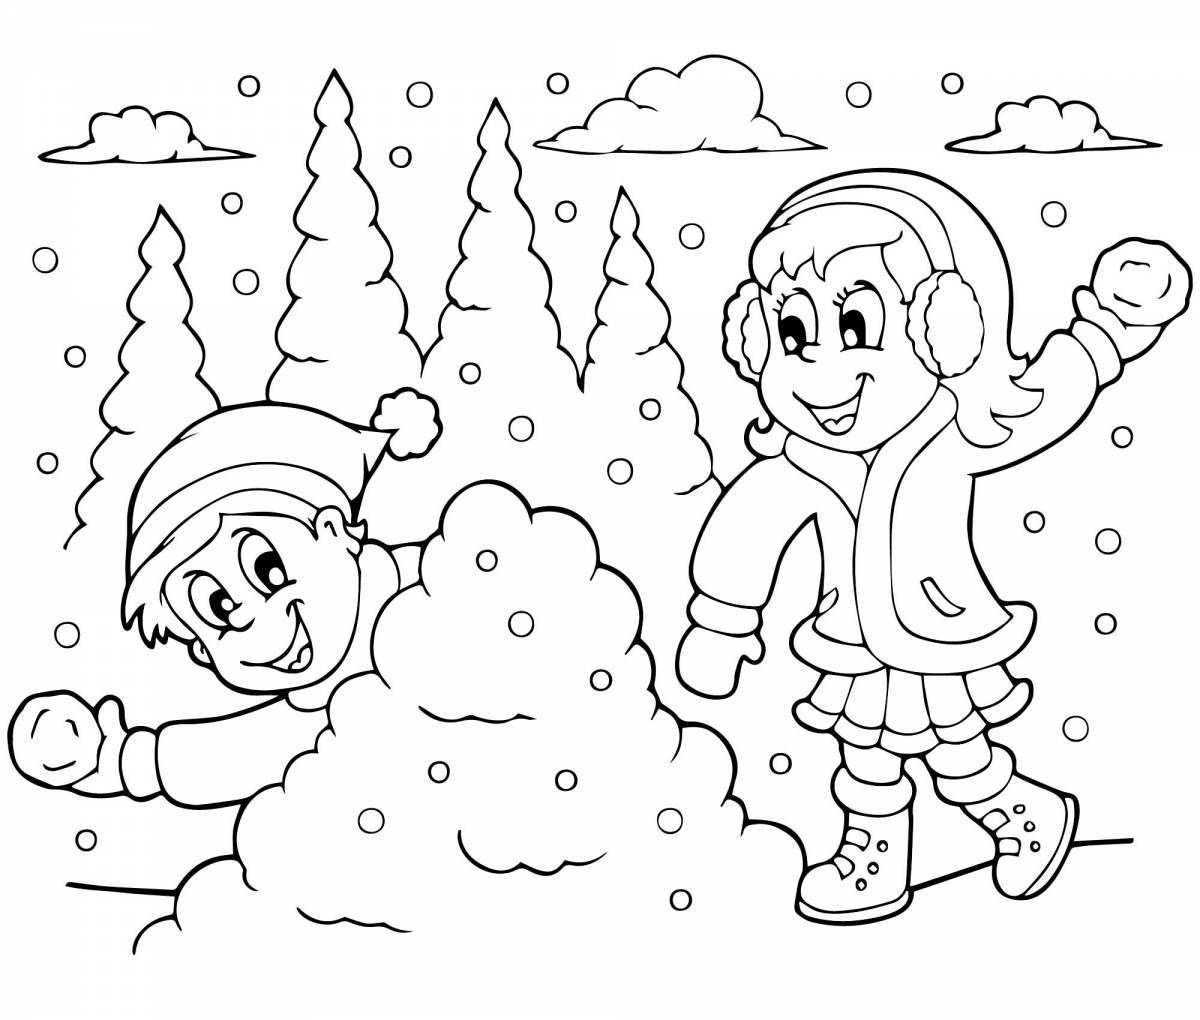 Colorful winter coloring book